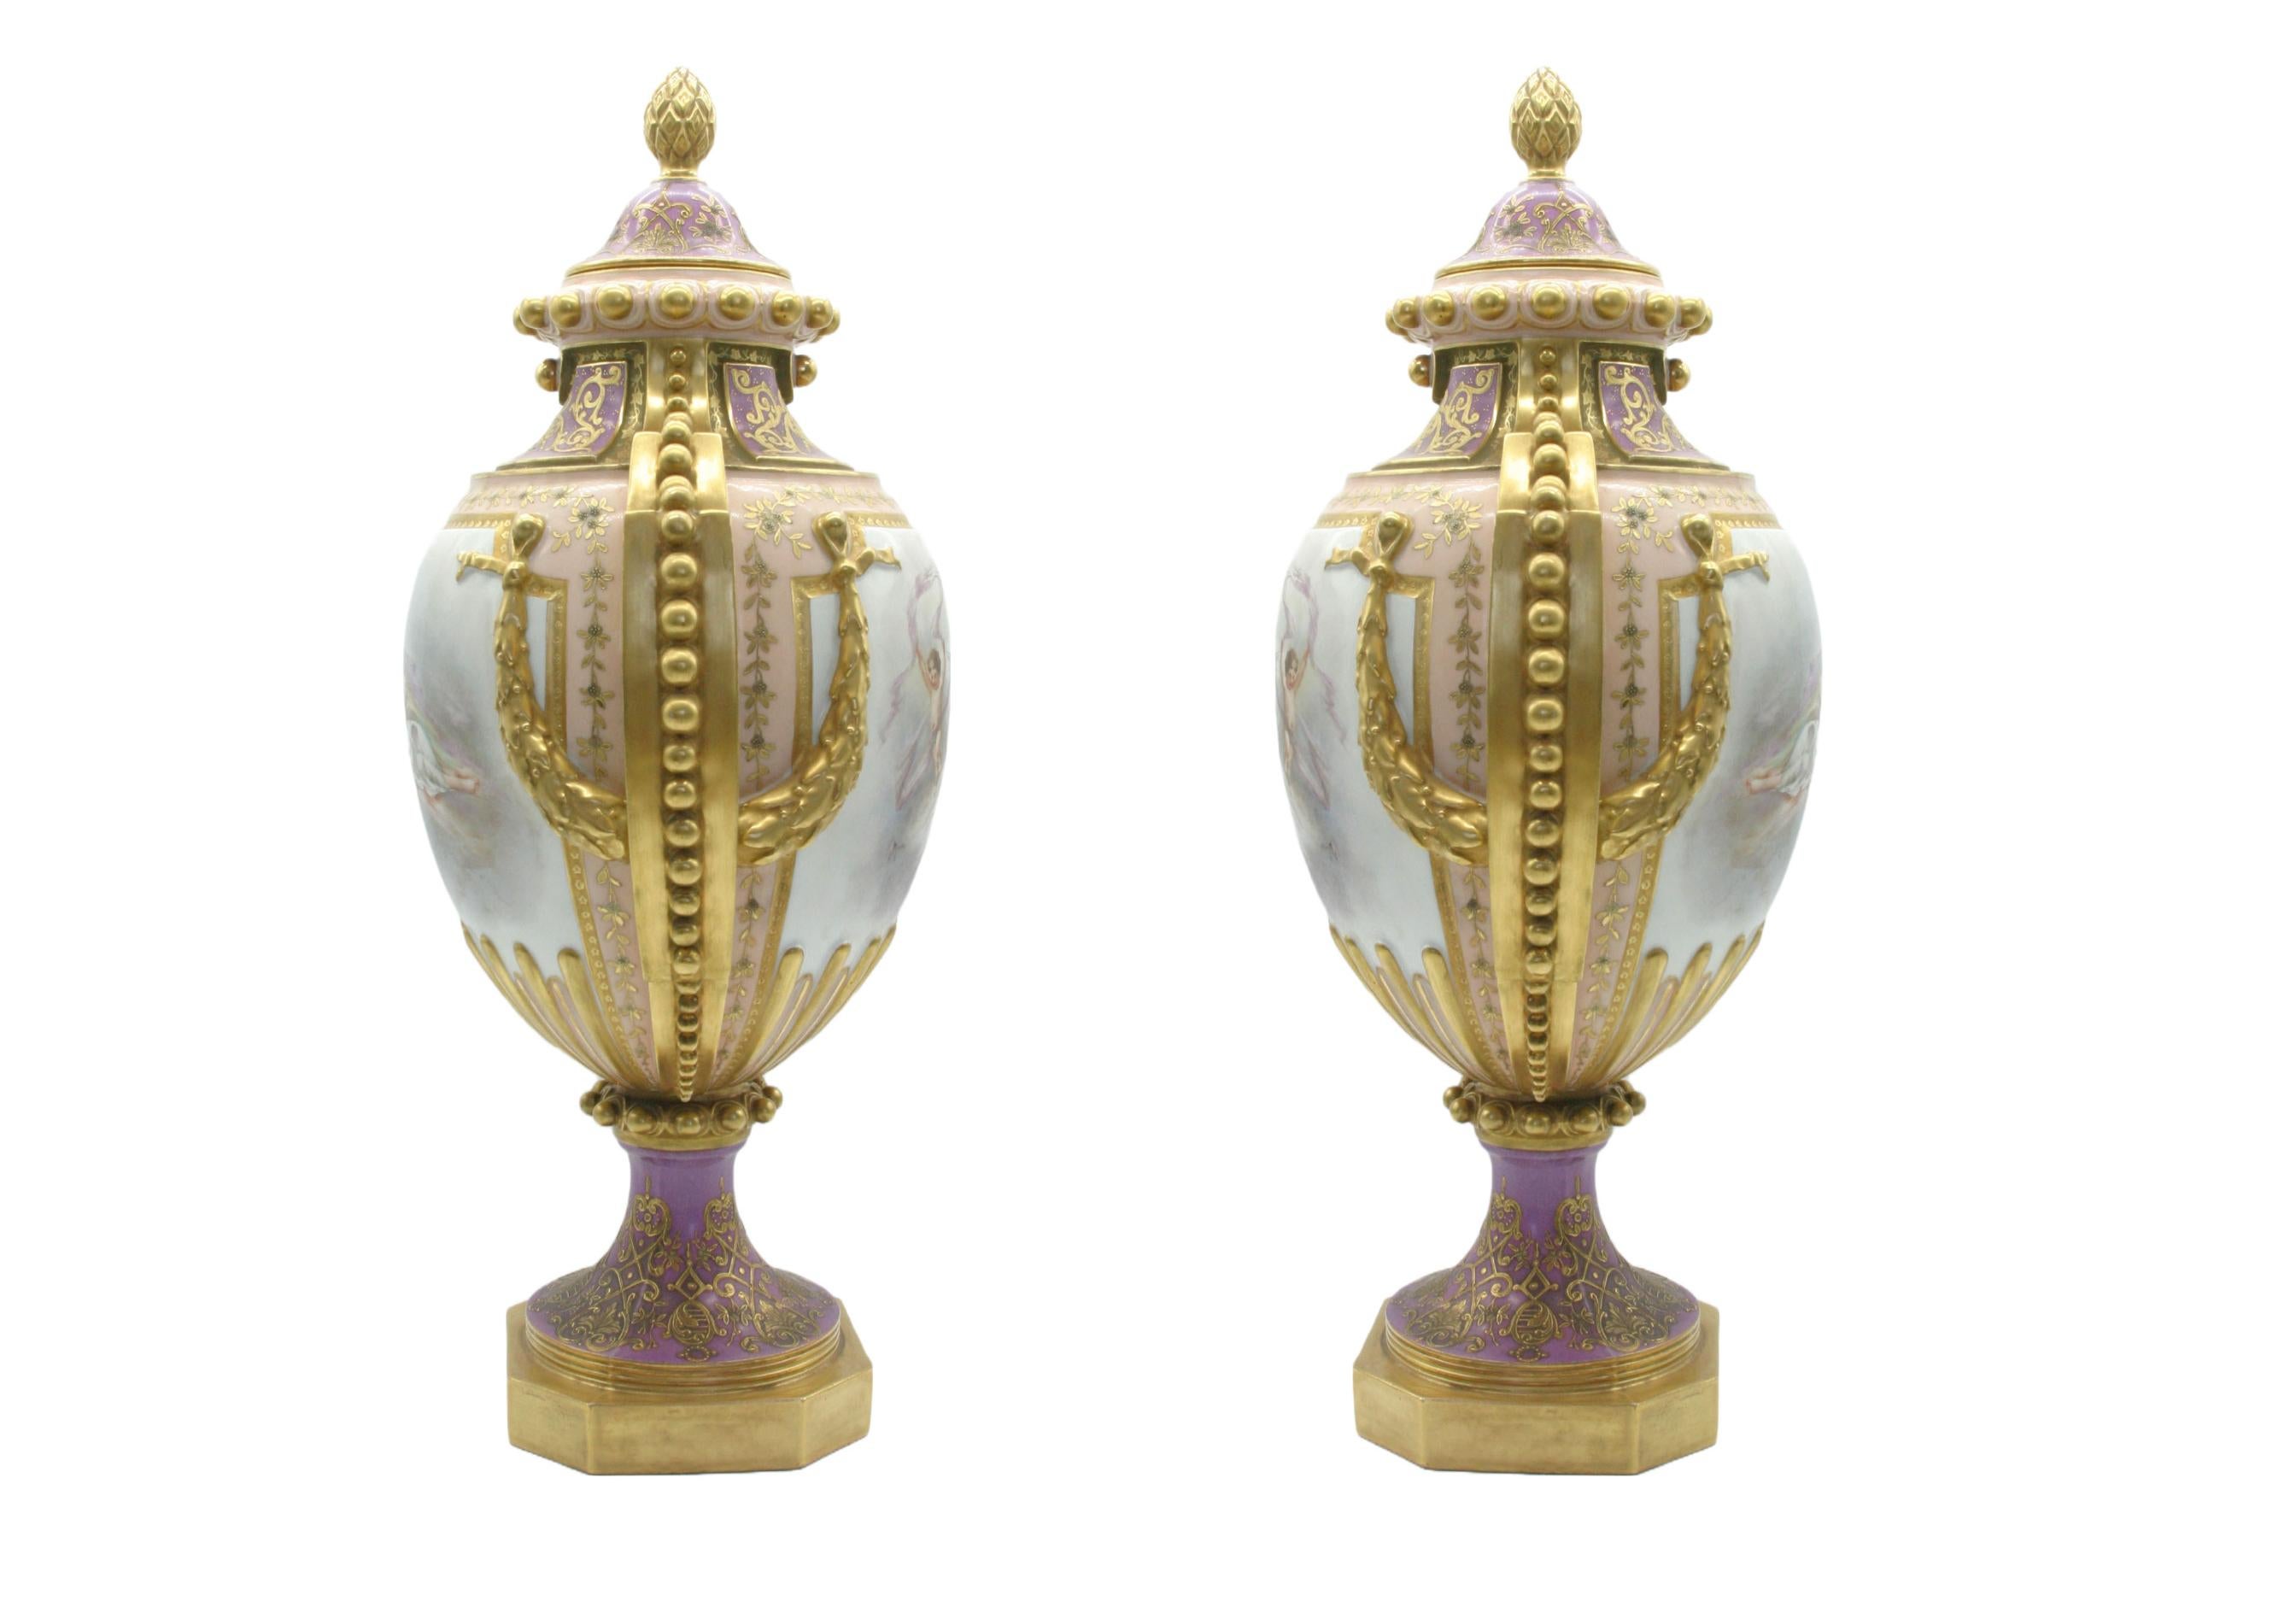 Large pair early 19th Century gild hand painted and crafted porcelain covered decorative urns / vases . Each urn features exterior painted scene details with gilt gold side handles. Each signed with pseudo sevres mark and artist signature 